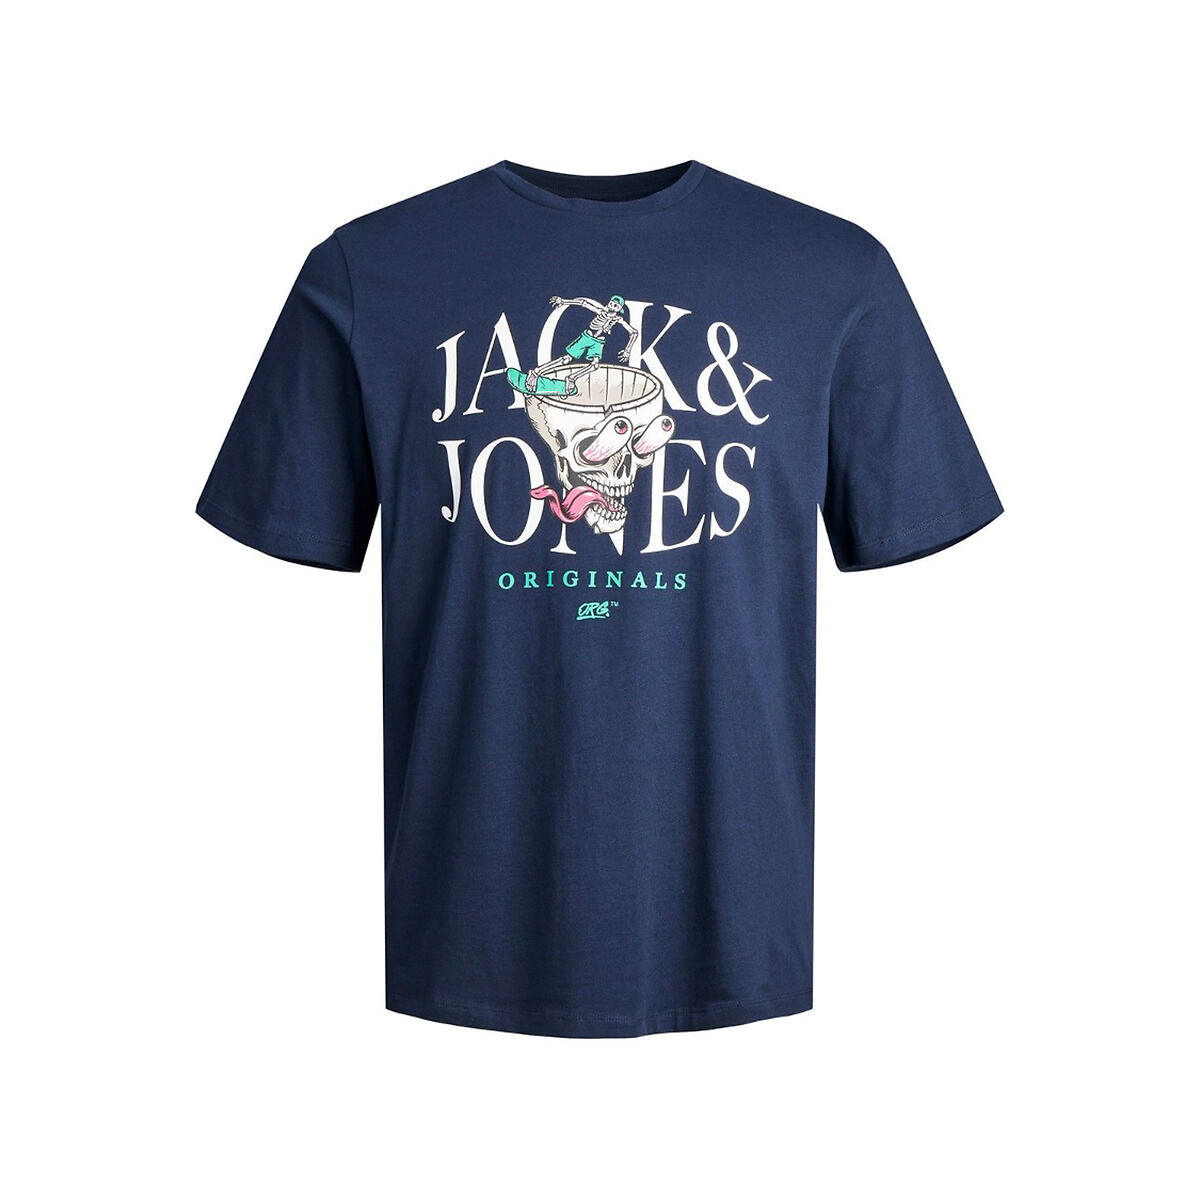 Printed cotton t-shirt with short sleeves, navy blue, Jack & Jones ...